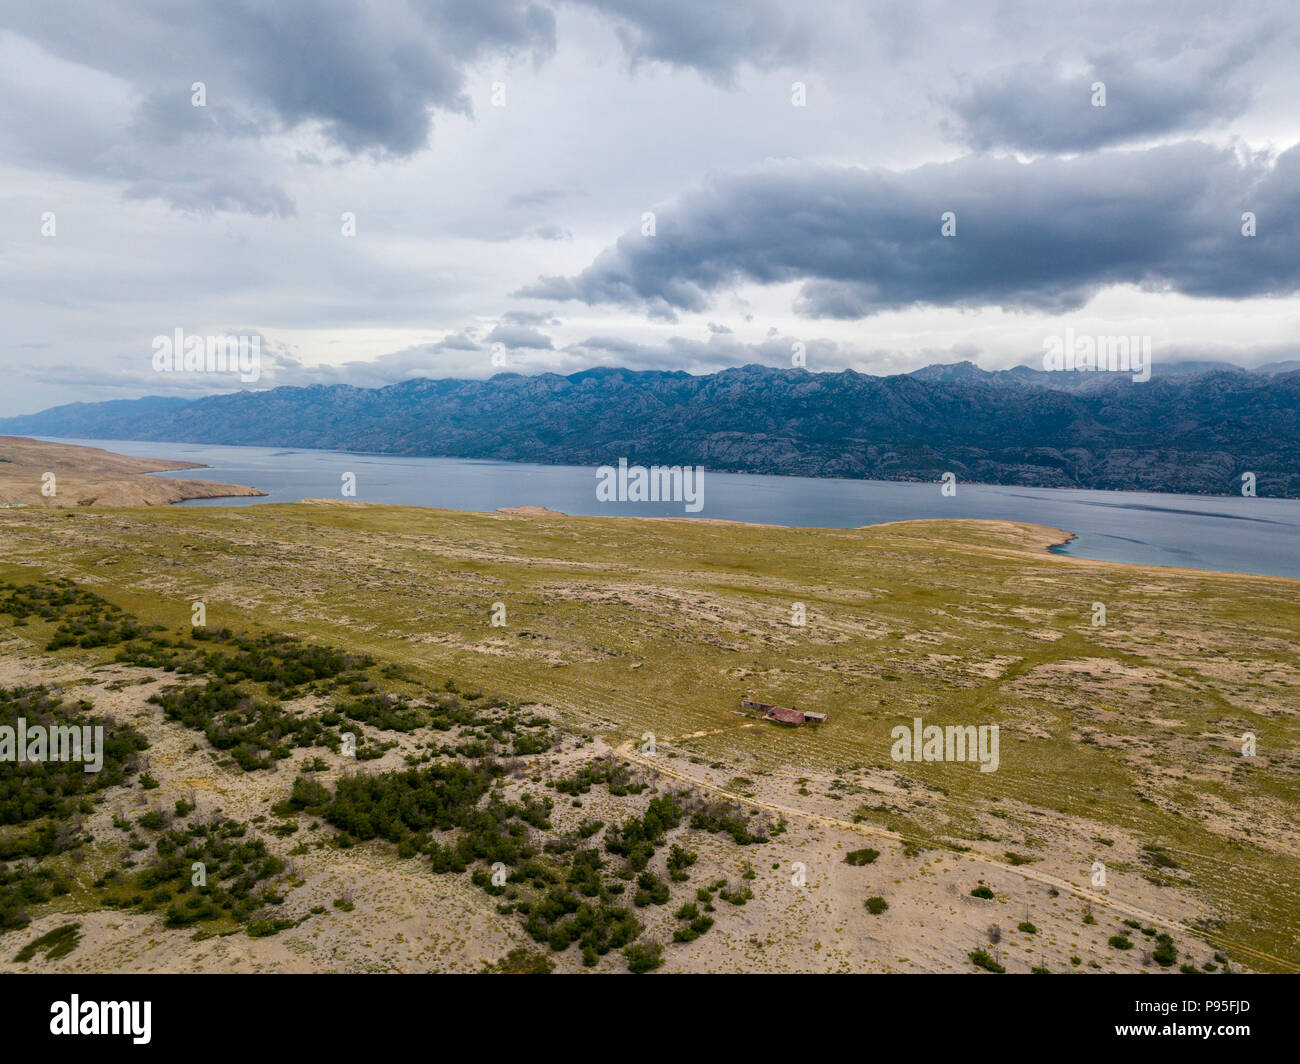 Aerial view of an uninhabited area, wild nature. Coast of Croatia. Island of Pag and mountains on the horizon Stock Photo